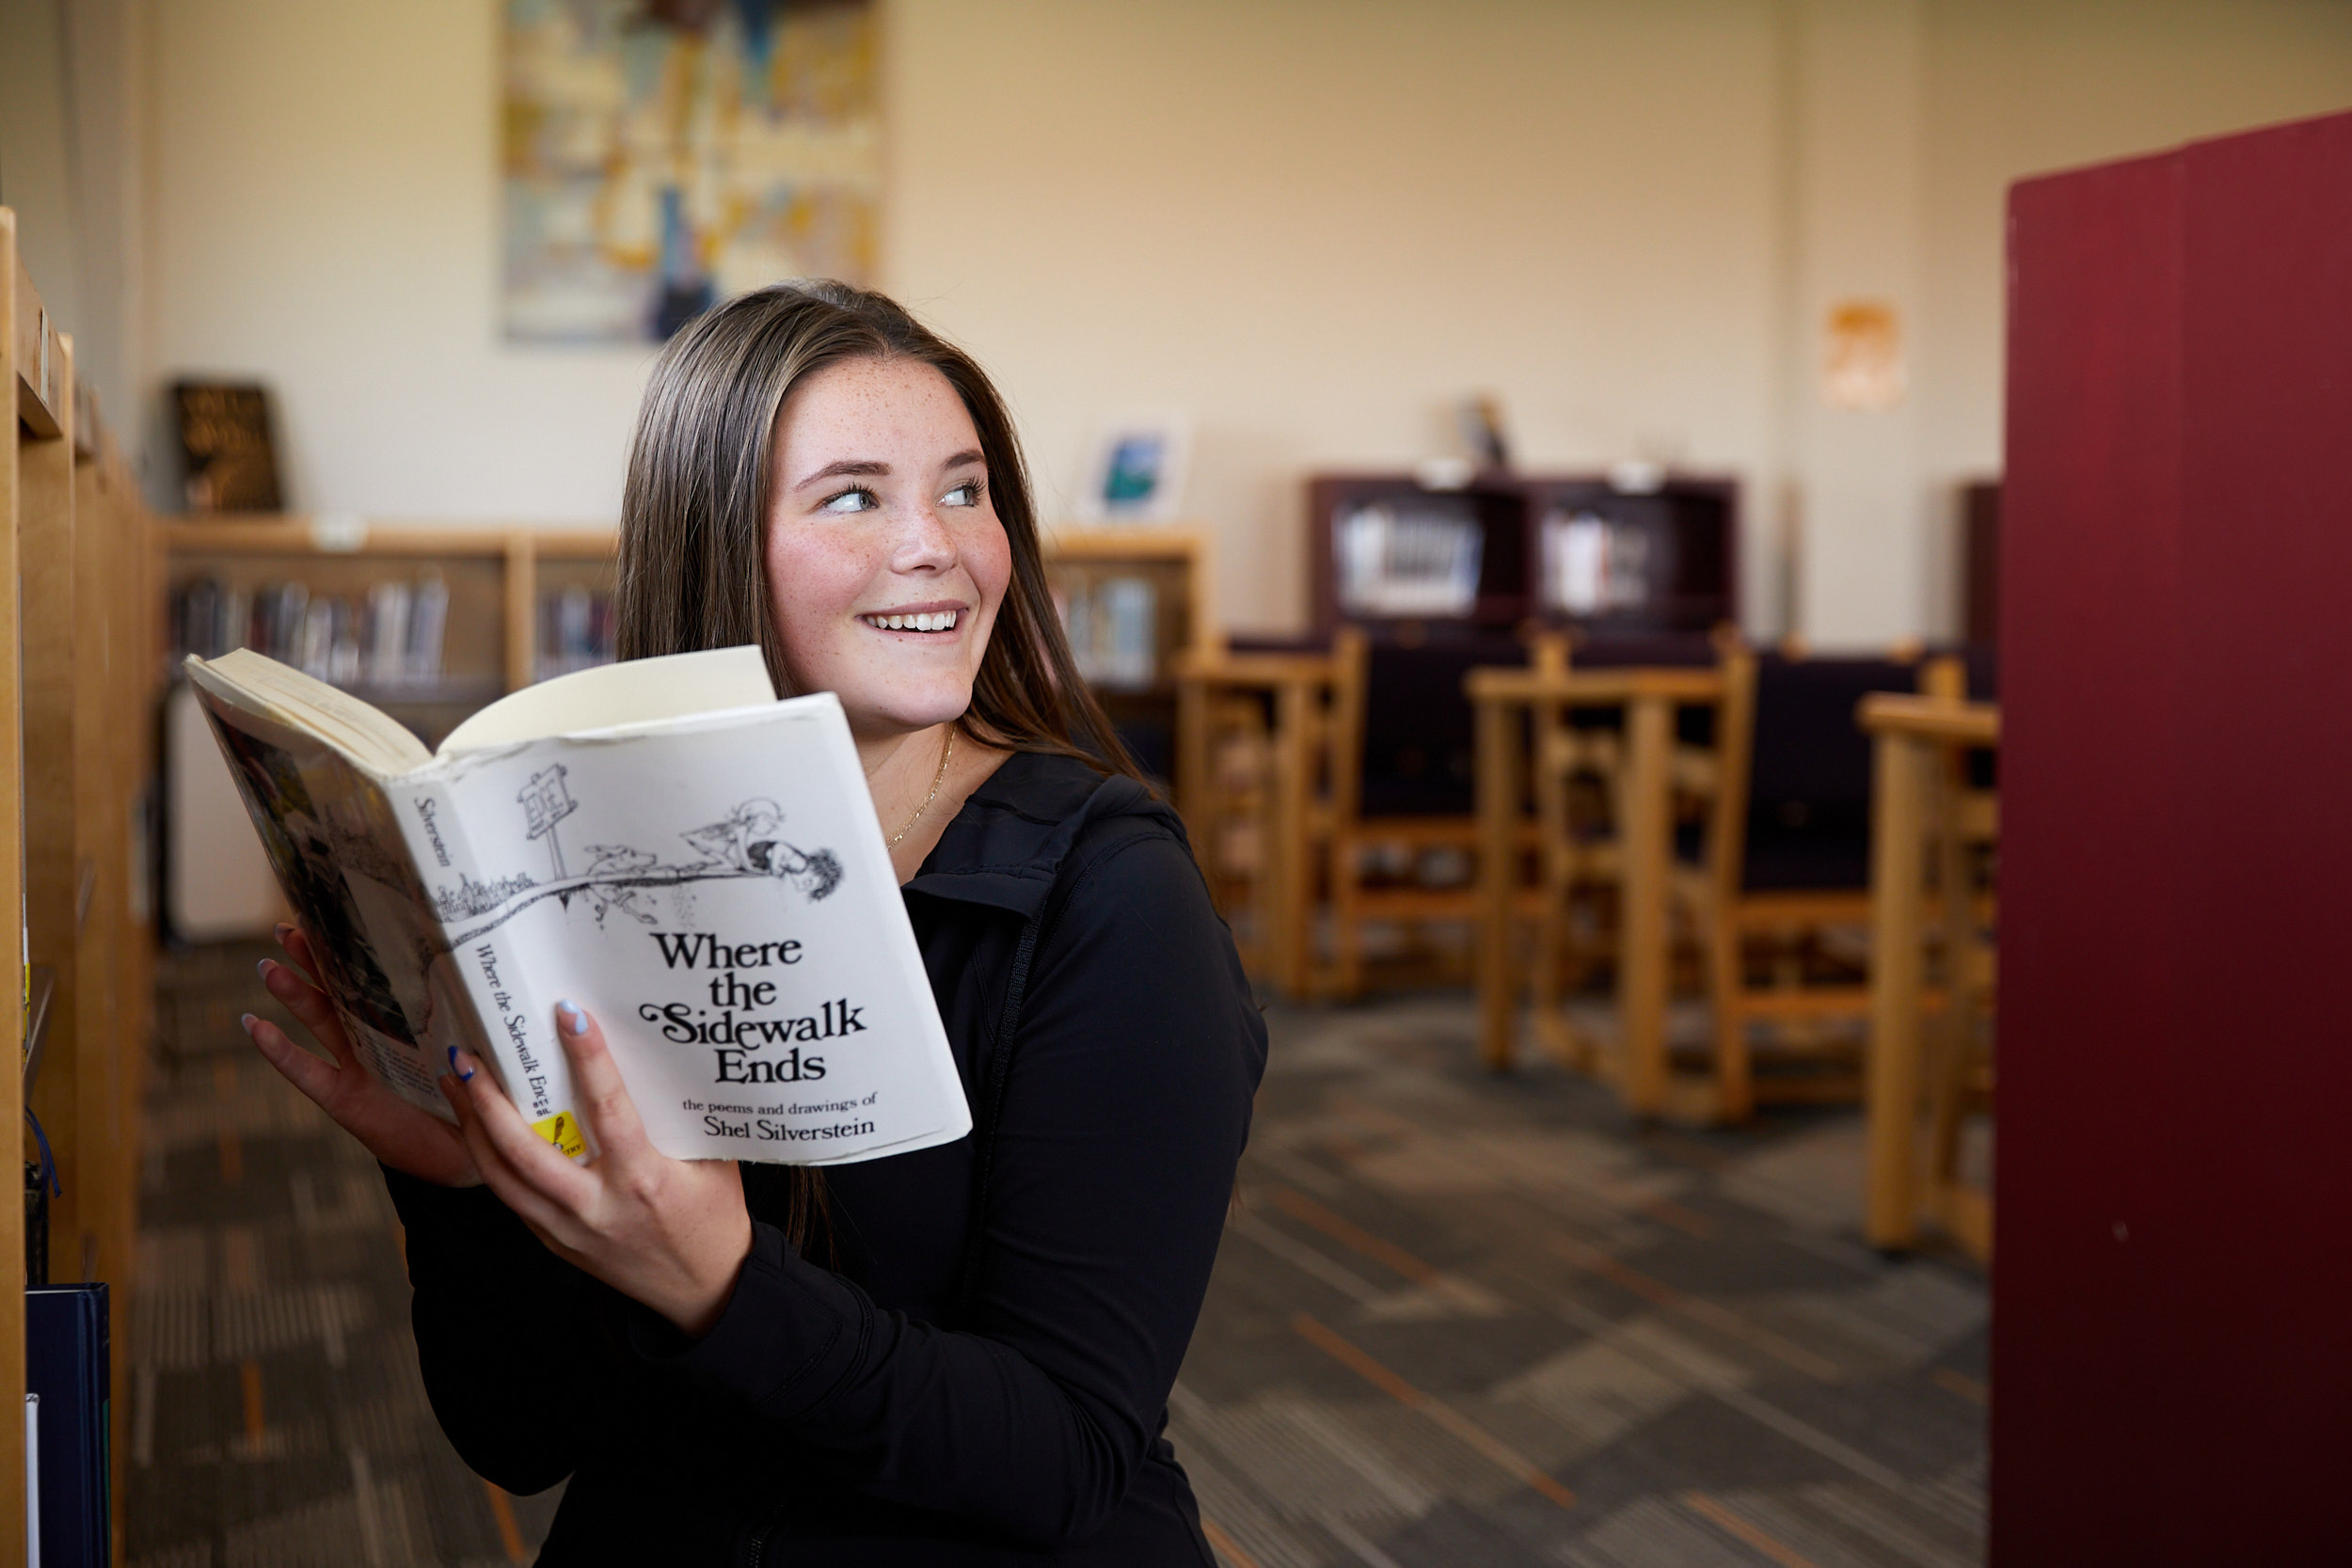 Windsor High School student reading a book in the library - John Robson Photography